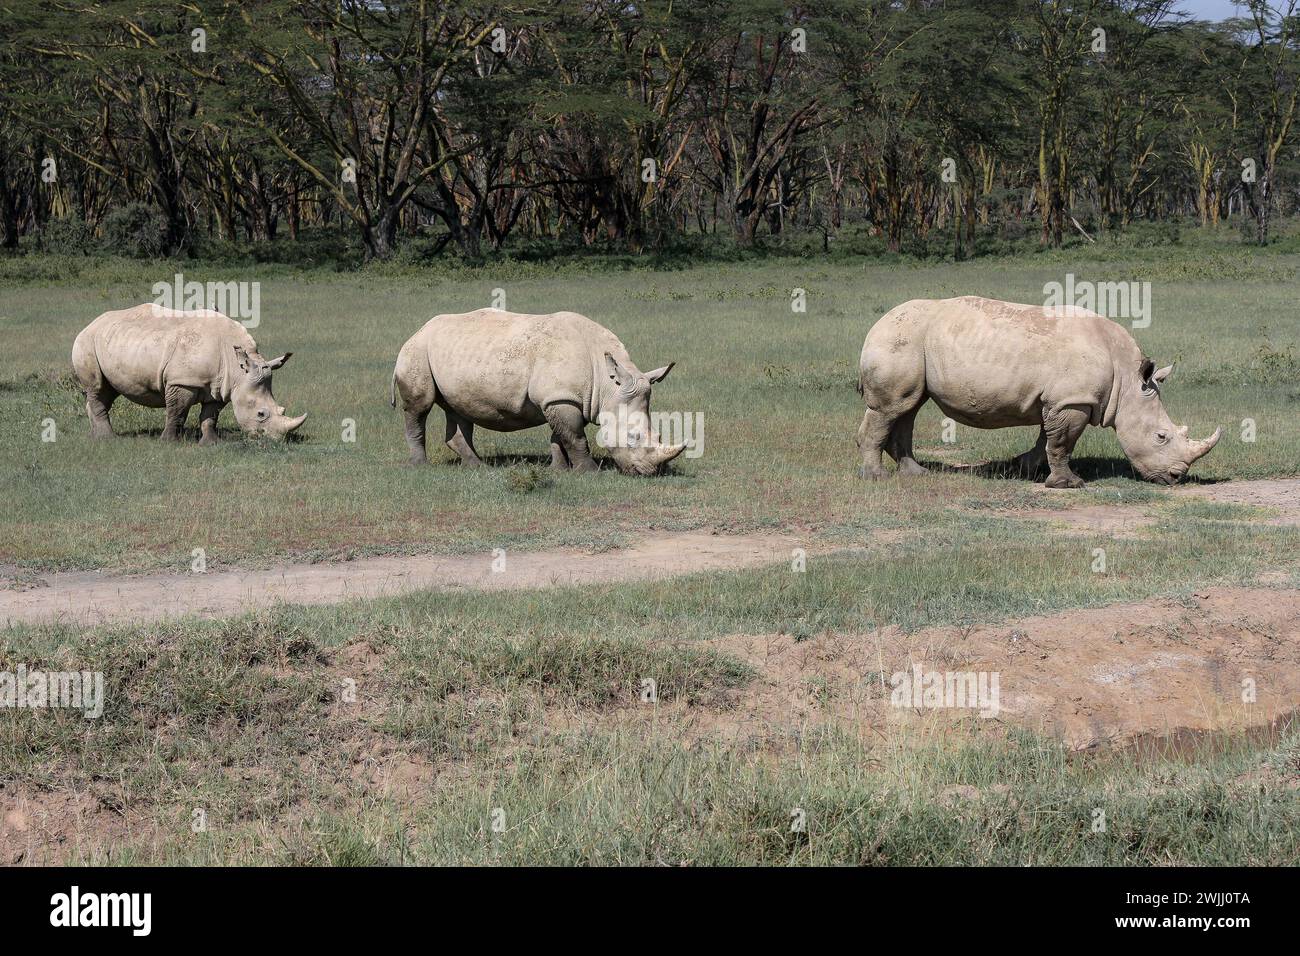 Three white rhinos grazing in a green field with an acacia forest in the background near Lake Naruku, Kenya, Africa. Stock Photo